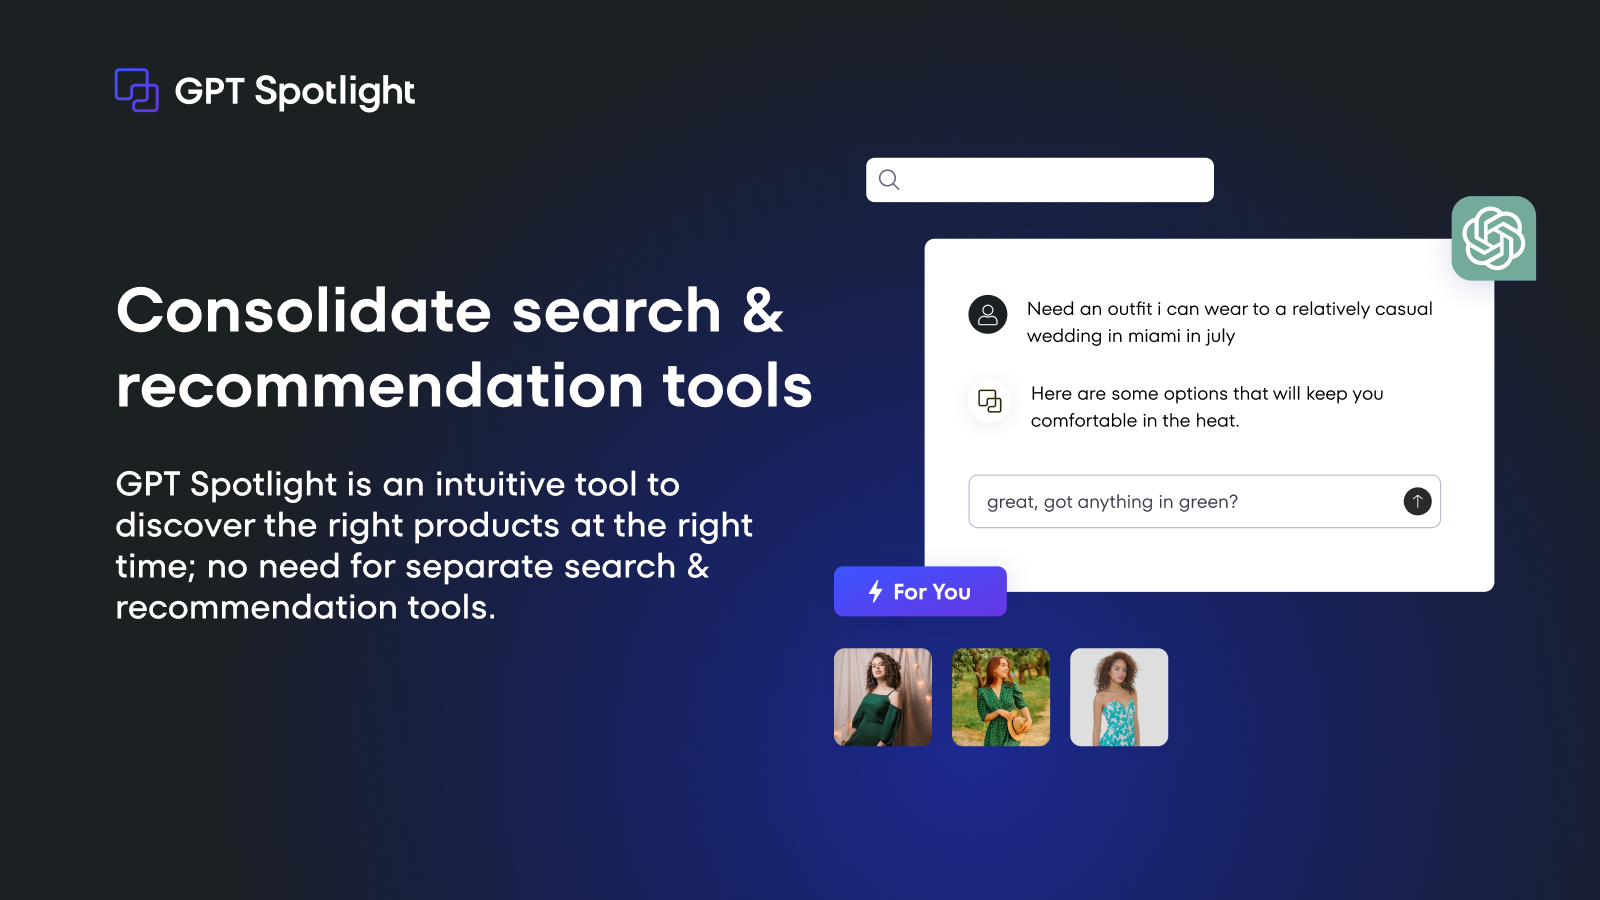 Consolidate search & recommendation tools